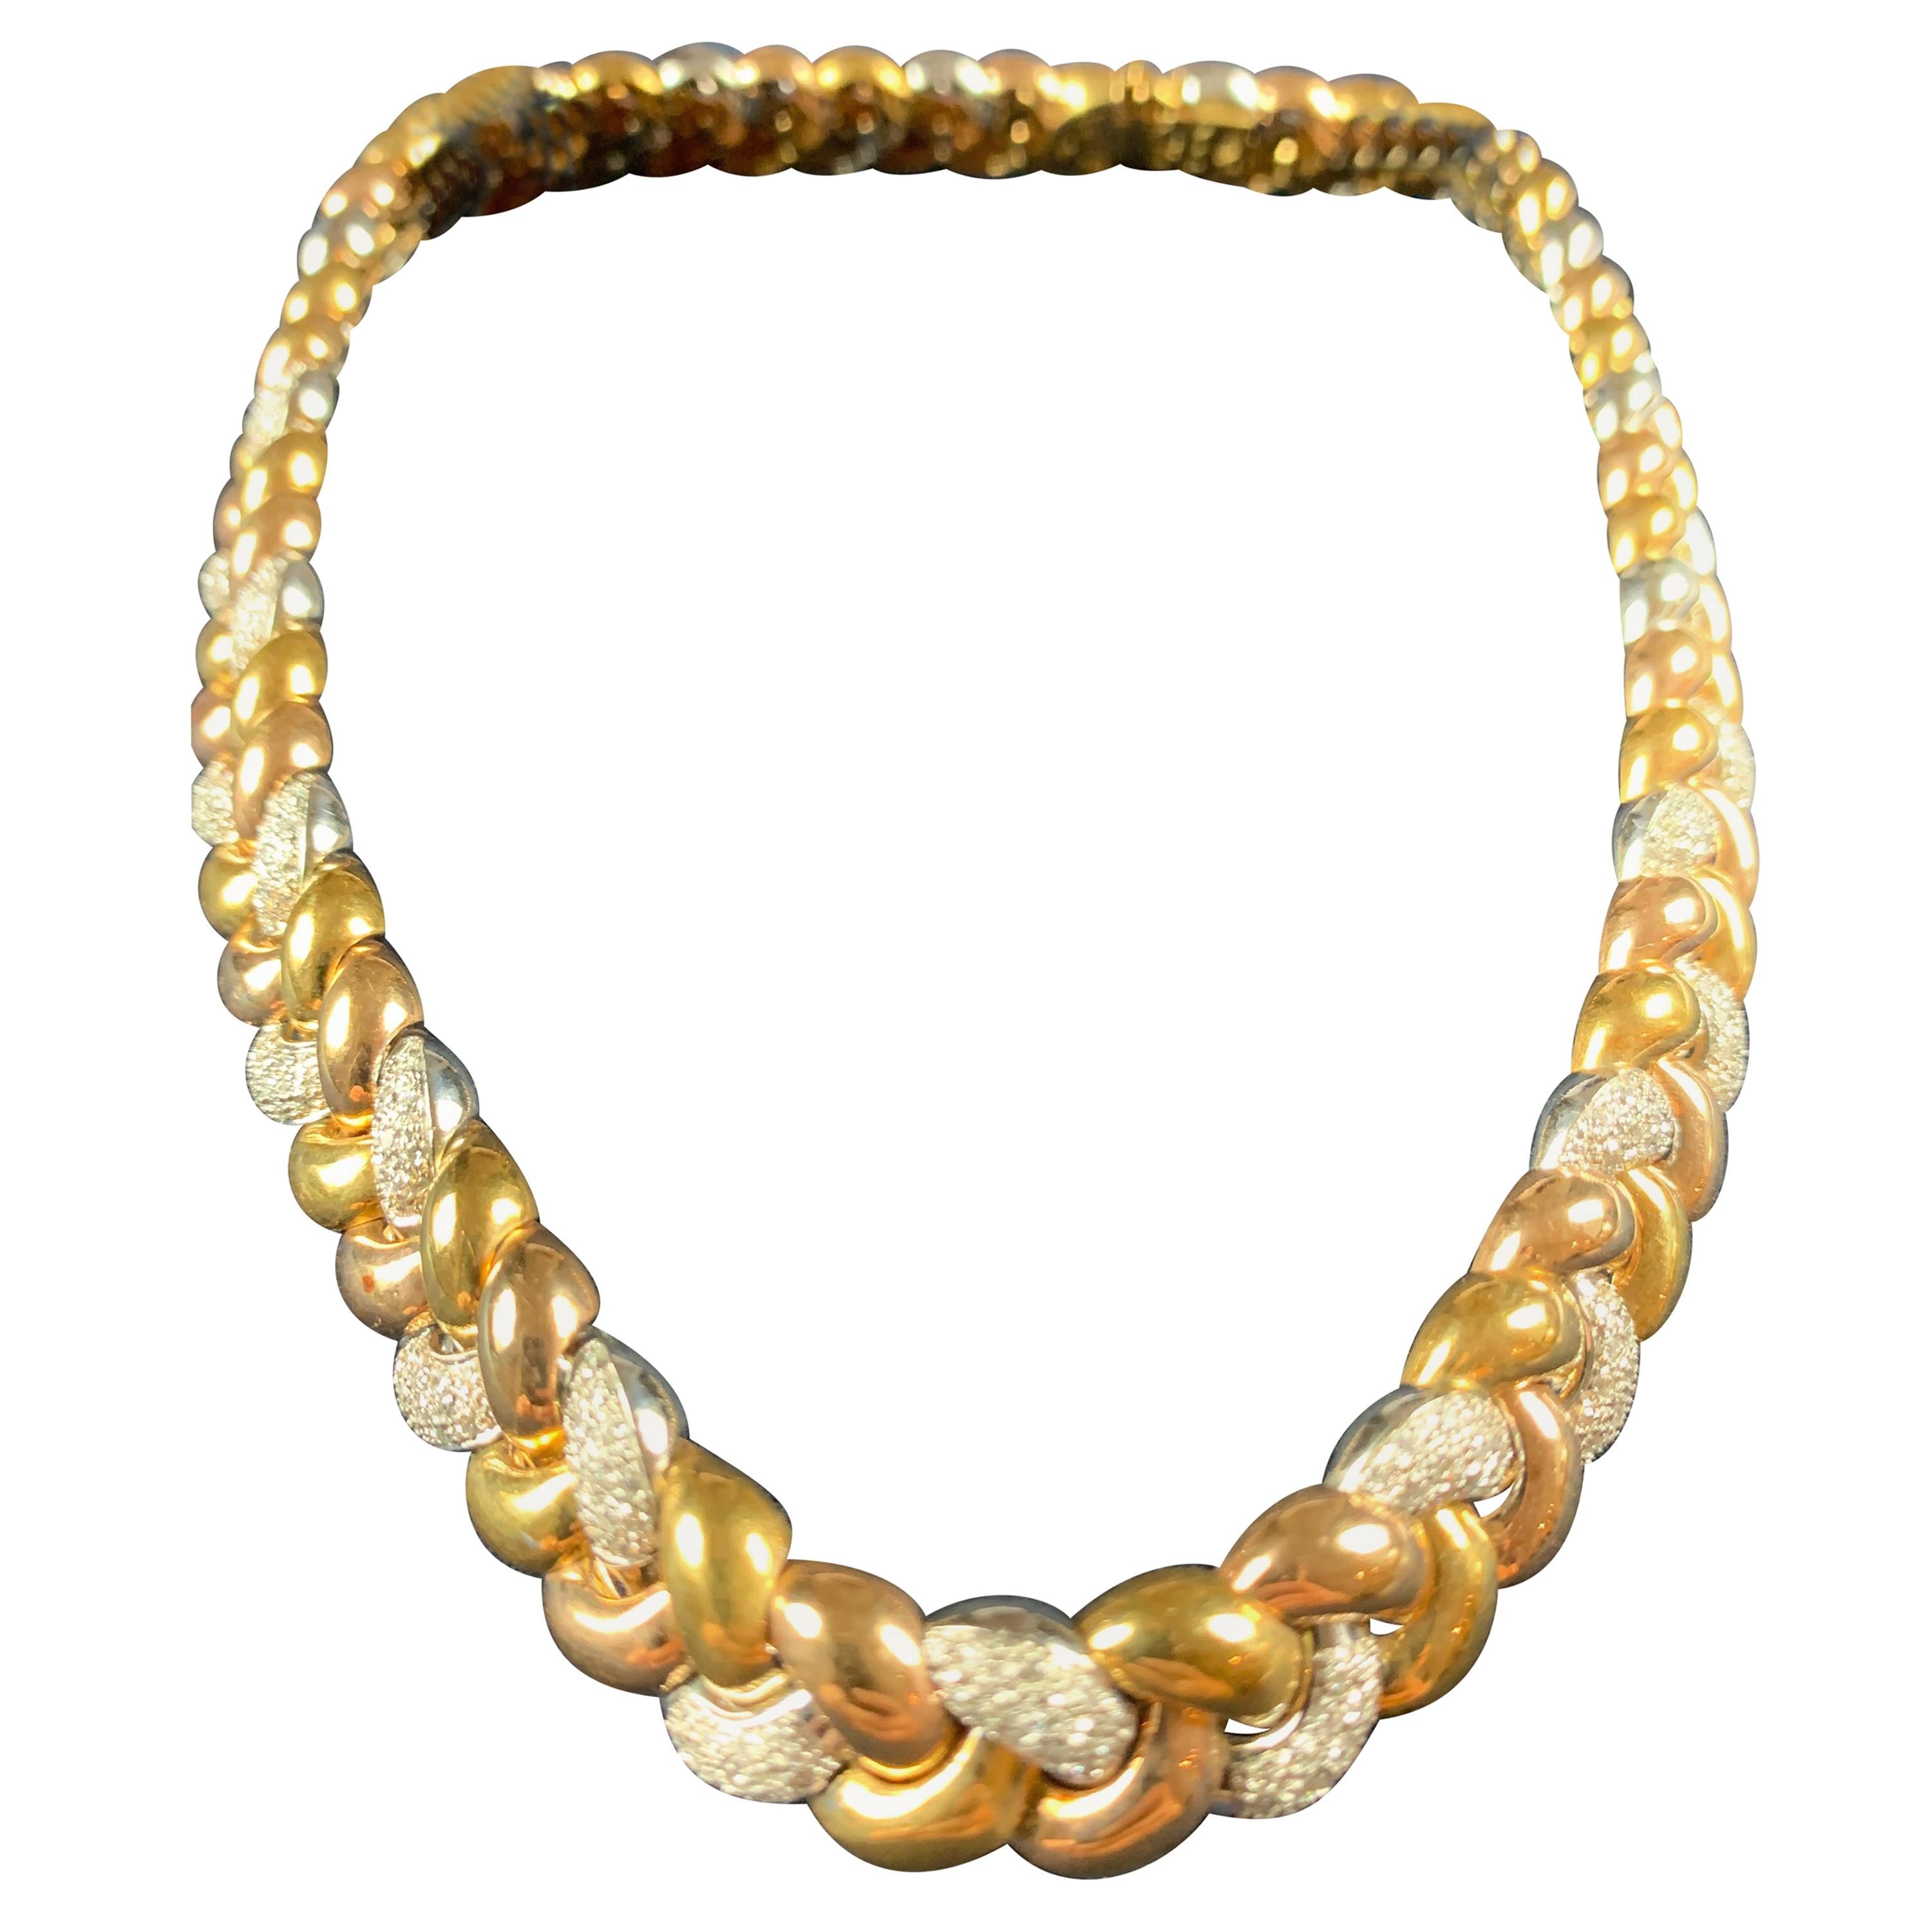 NON BRANDED FINE JEWELRY Made in Italy 14K Tri-Color Gold 18 Inch Solid  Herringbone Chain Necklace | CoolSprings Galleria